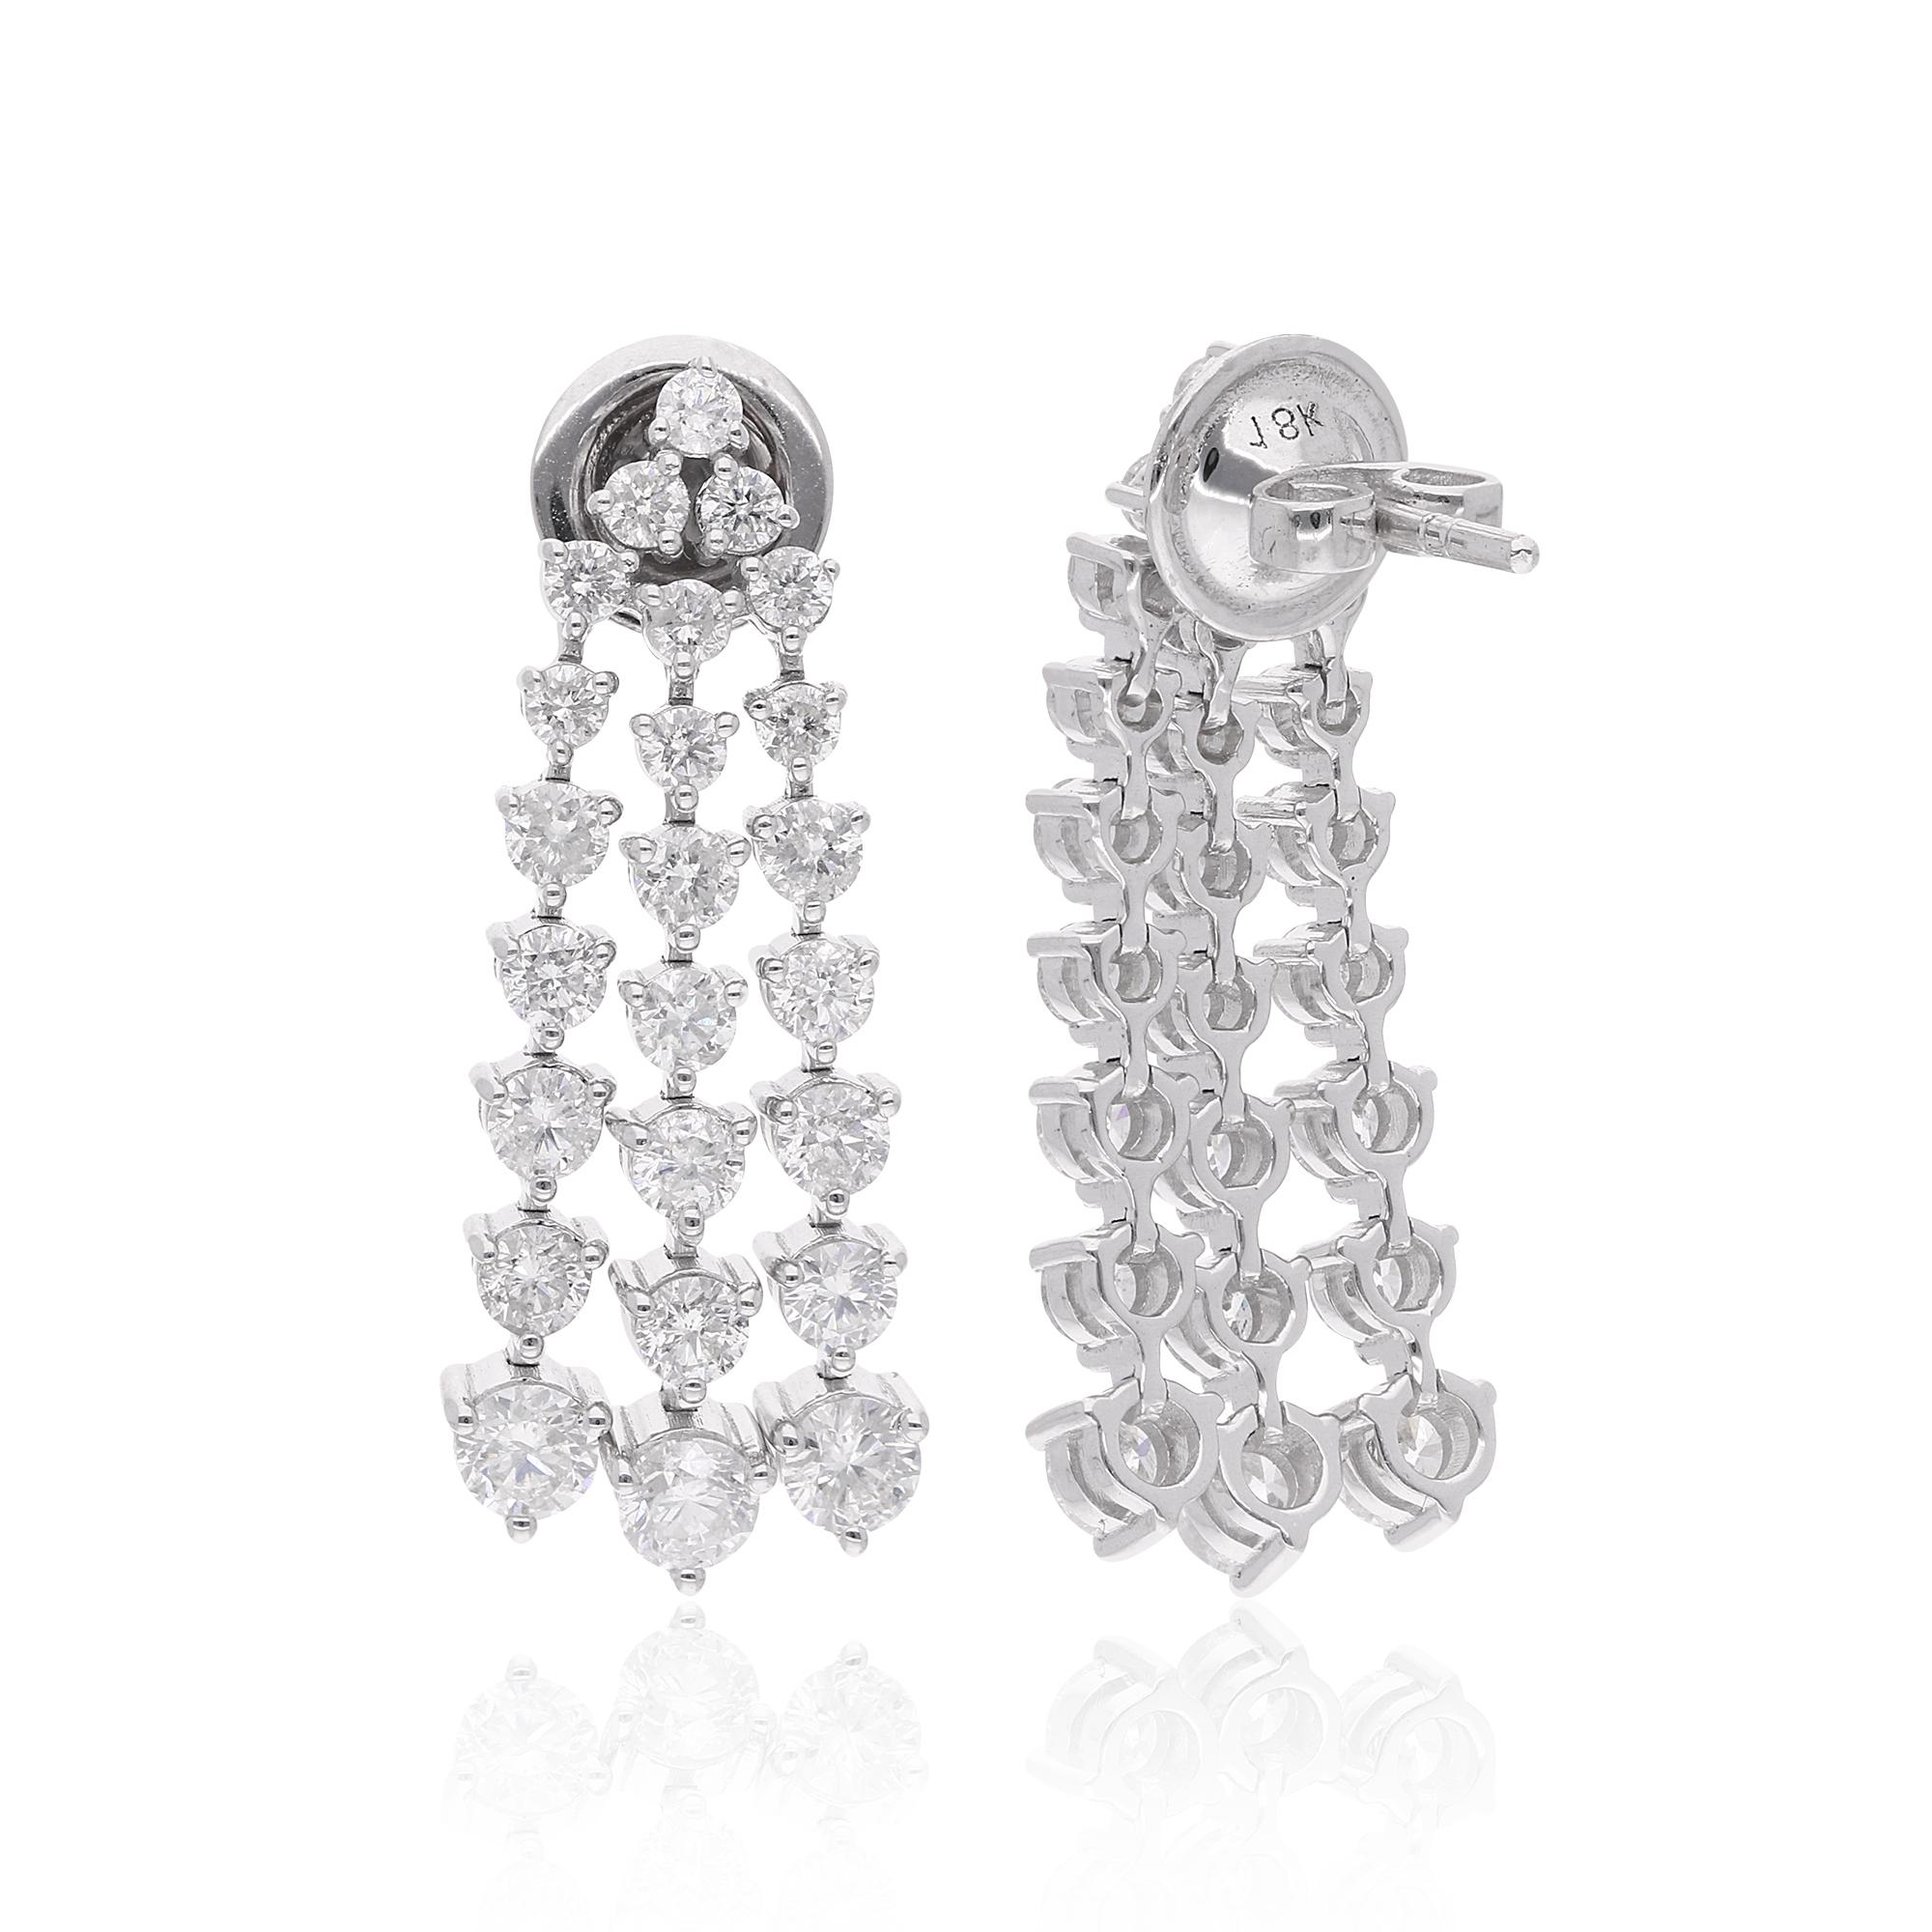 Make your look hypnotic and charming with this classy Earrings studded with Diamond featuring fascinating alluring 18k White Gold finish. Stylish floral design make it flamboyant and elegant that you can wear it on parties or on a special